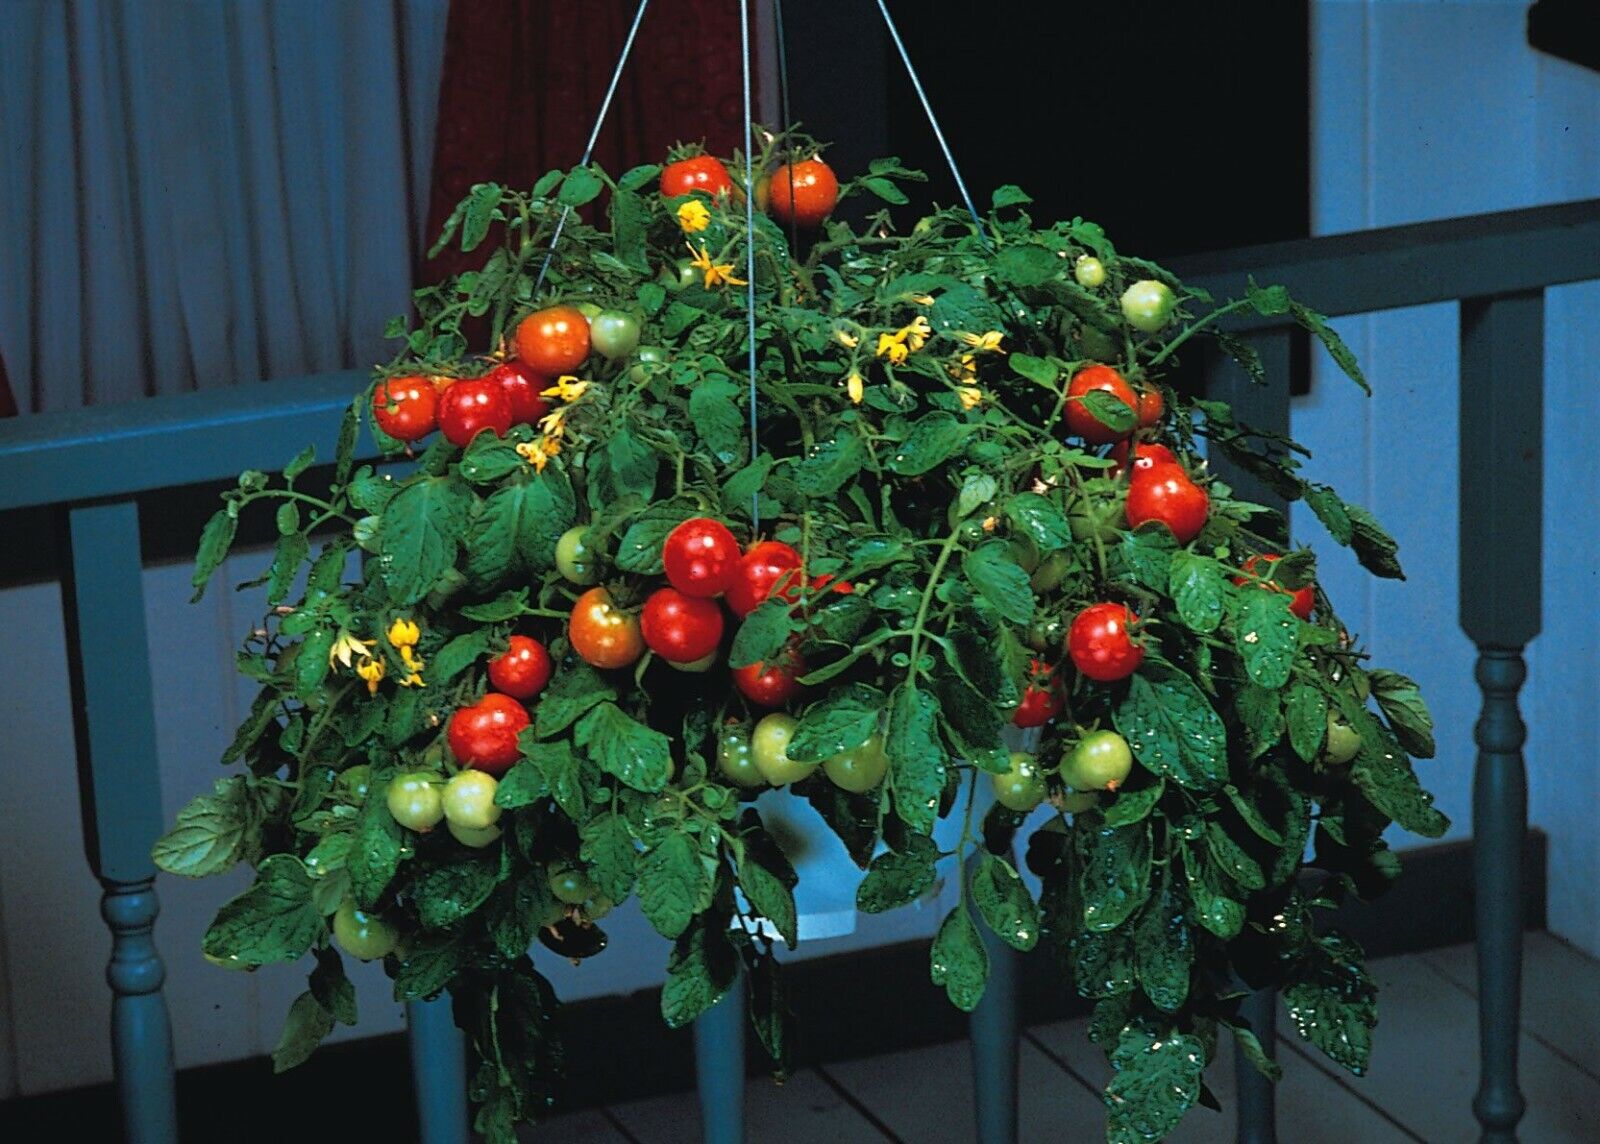 Seeds Tomato Balcony Miracle Red Vegetable Self-pollinating Organic Non GMO Unbranded - фотография #6